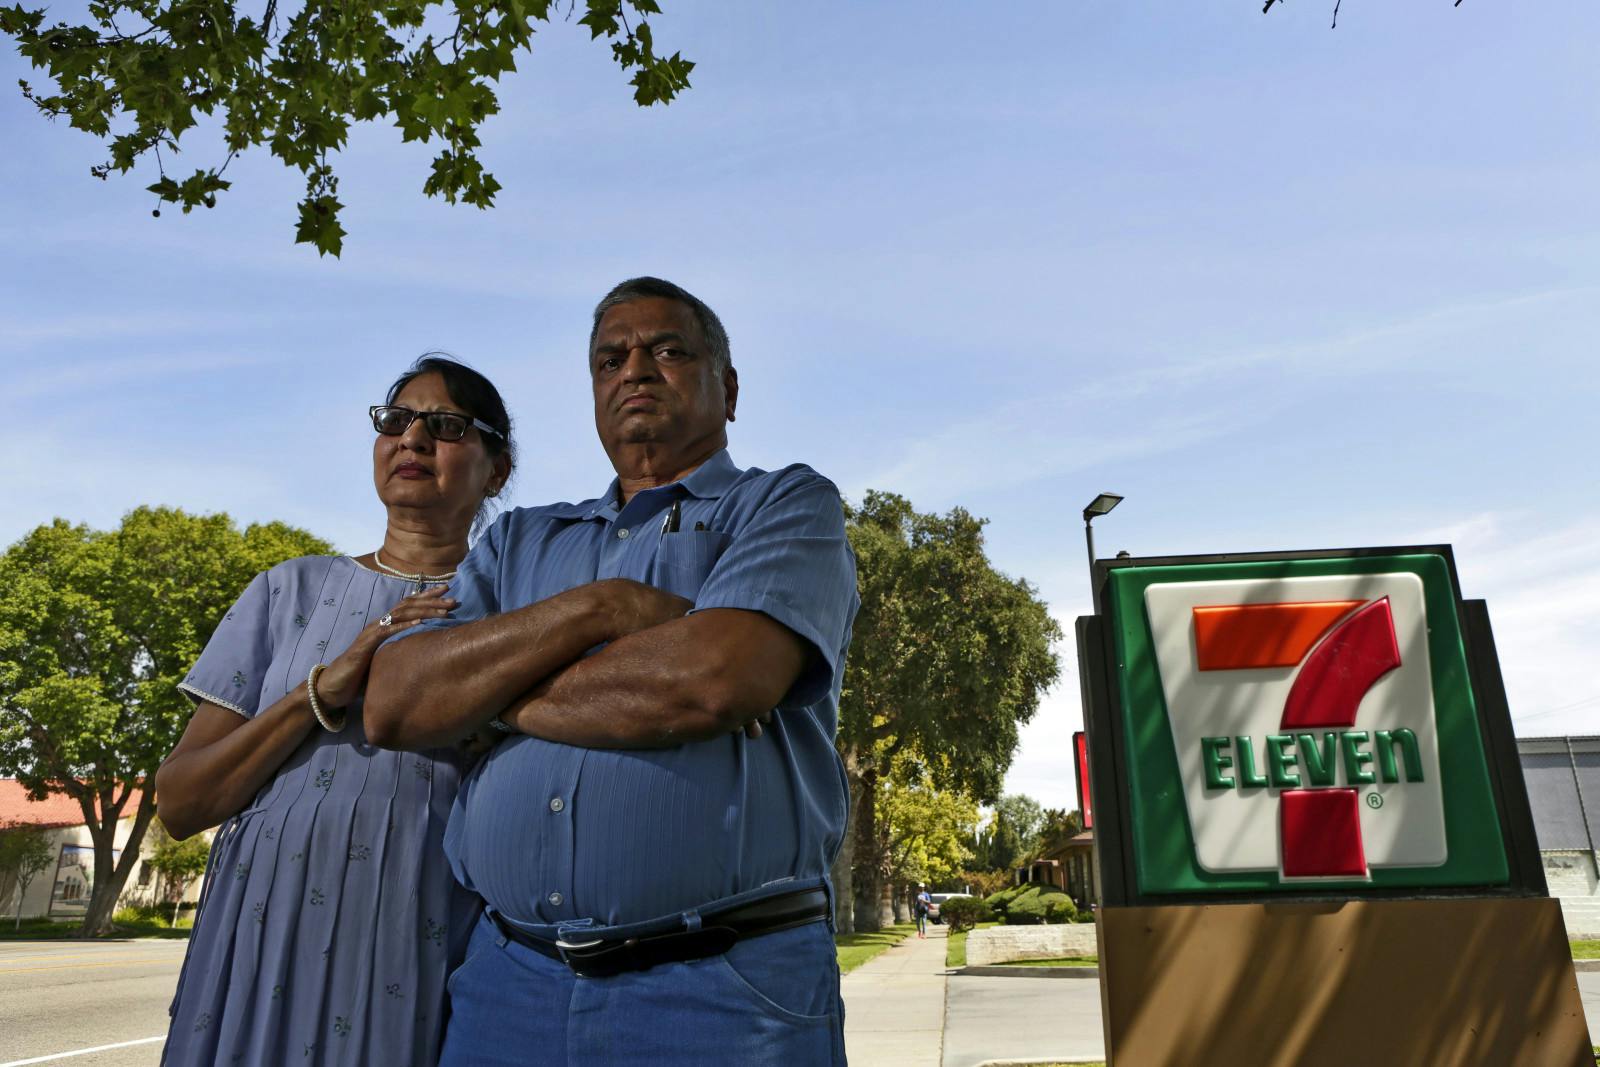 Dilip Patel, 63, right, and wife Saroj, 60, owned a 7-Eleven store in Riverside for nearly two decades (Irfan Khan/Los Angeles Times via Getty Images)